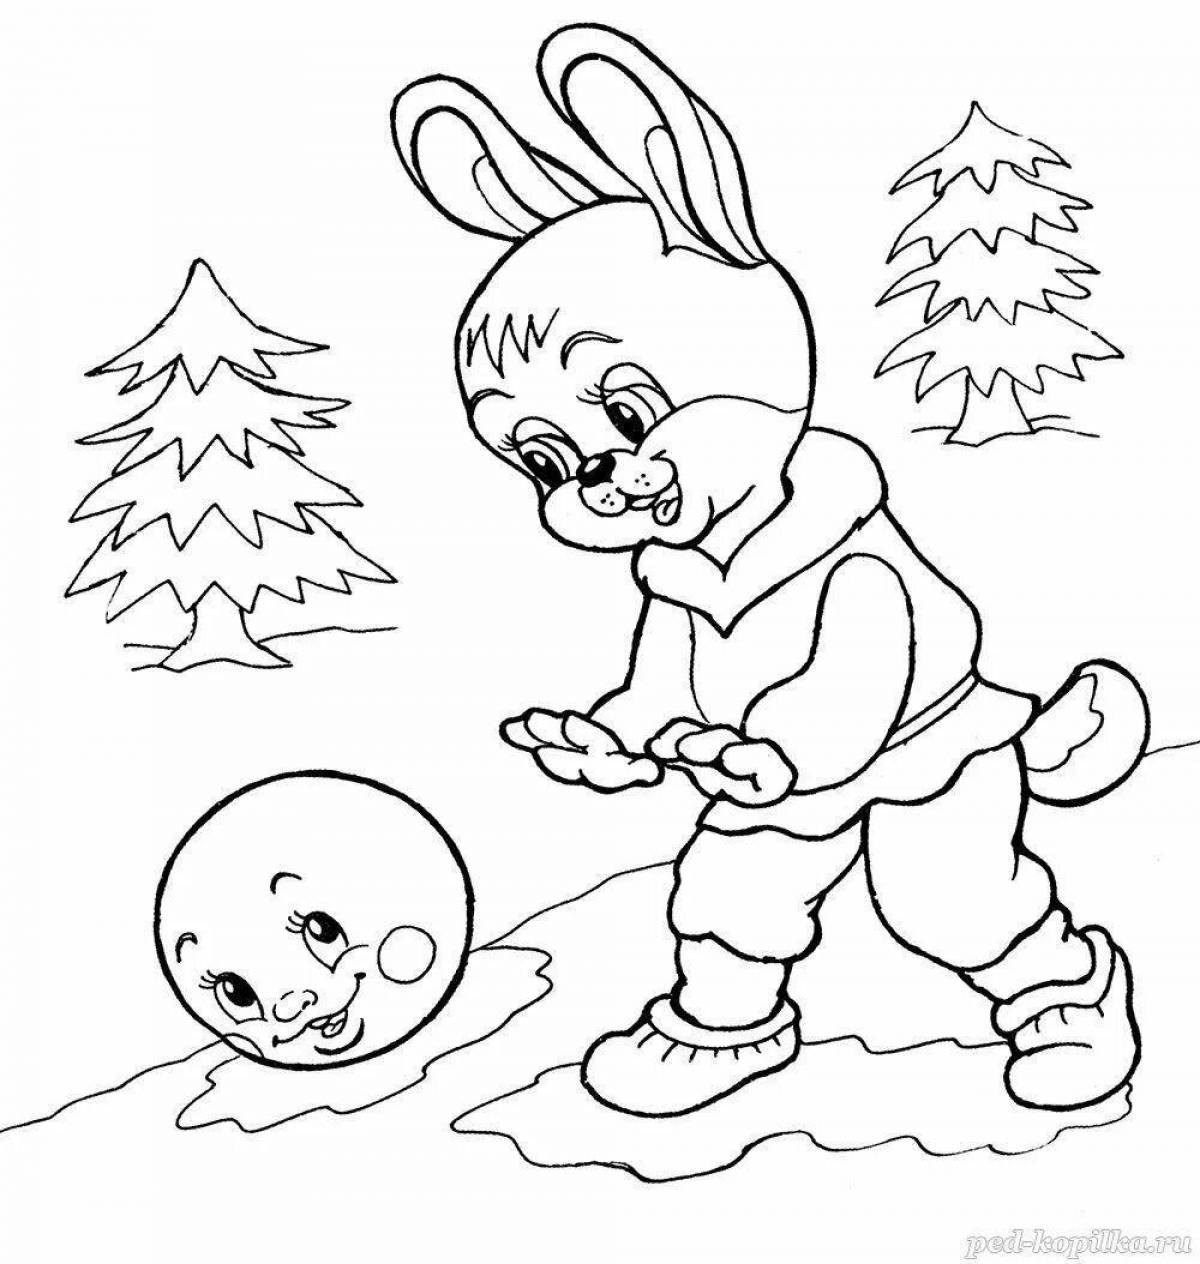 Coloring Books of Hero Buns